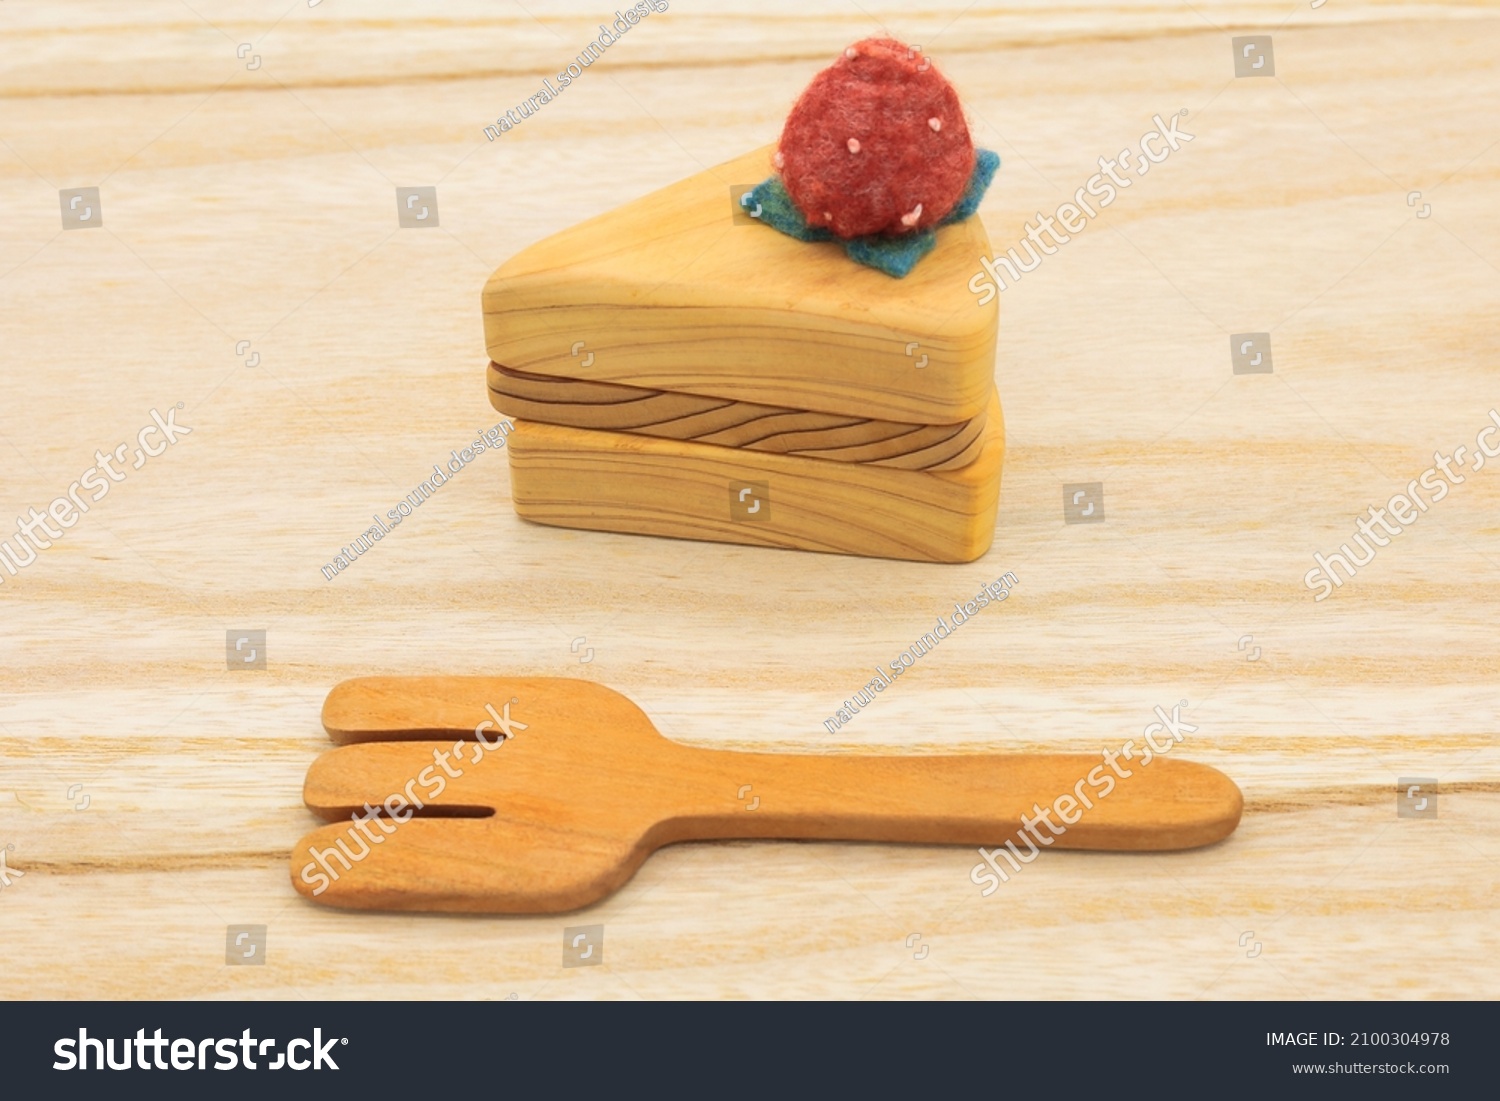 Cute wooden kitchen miscellaneous goods placed on a cutting board #2100304978